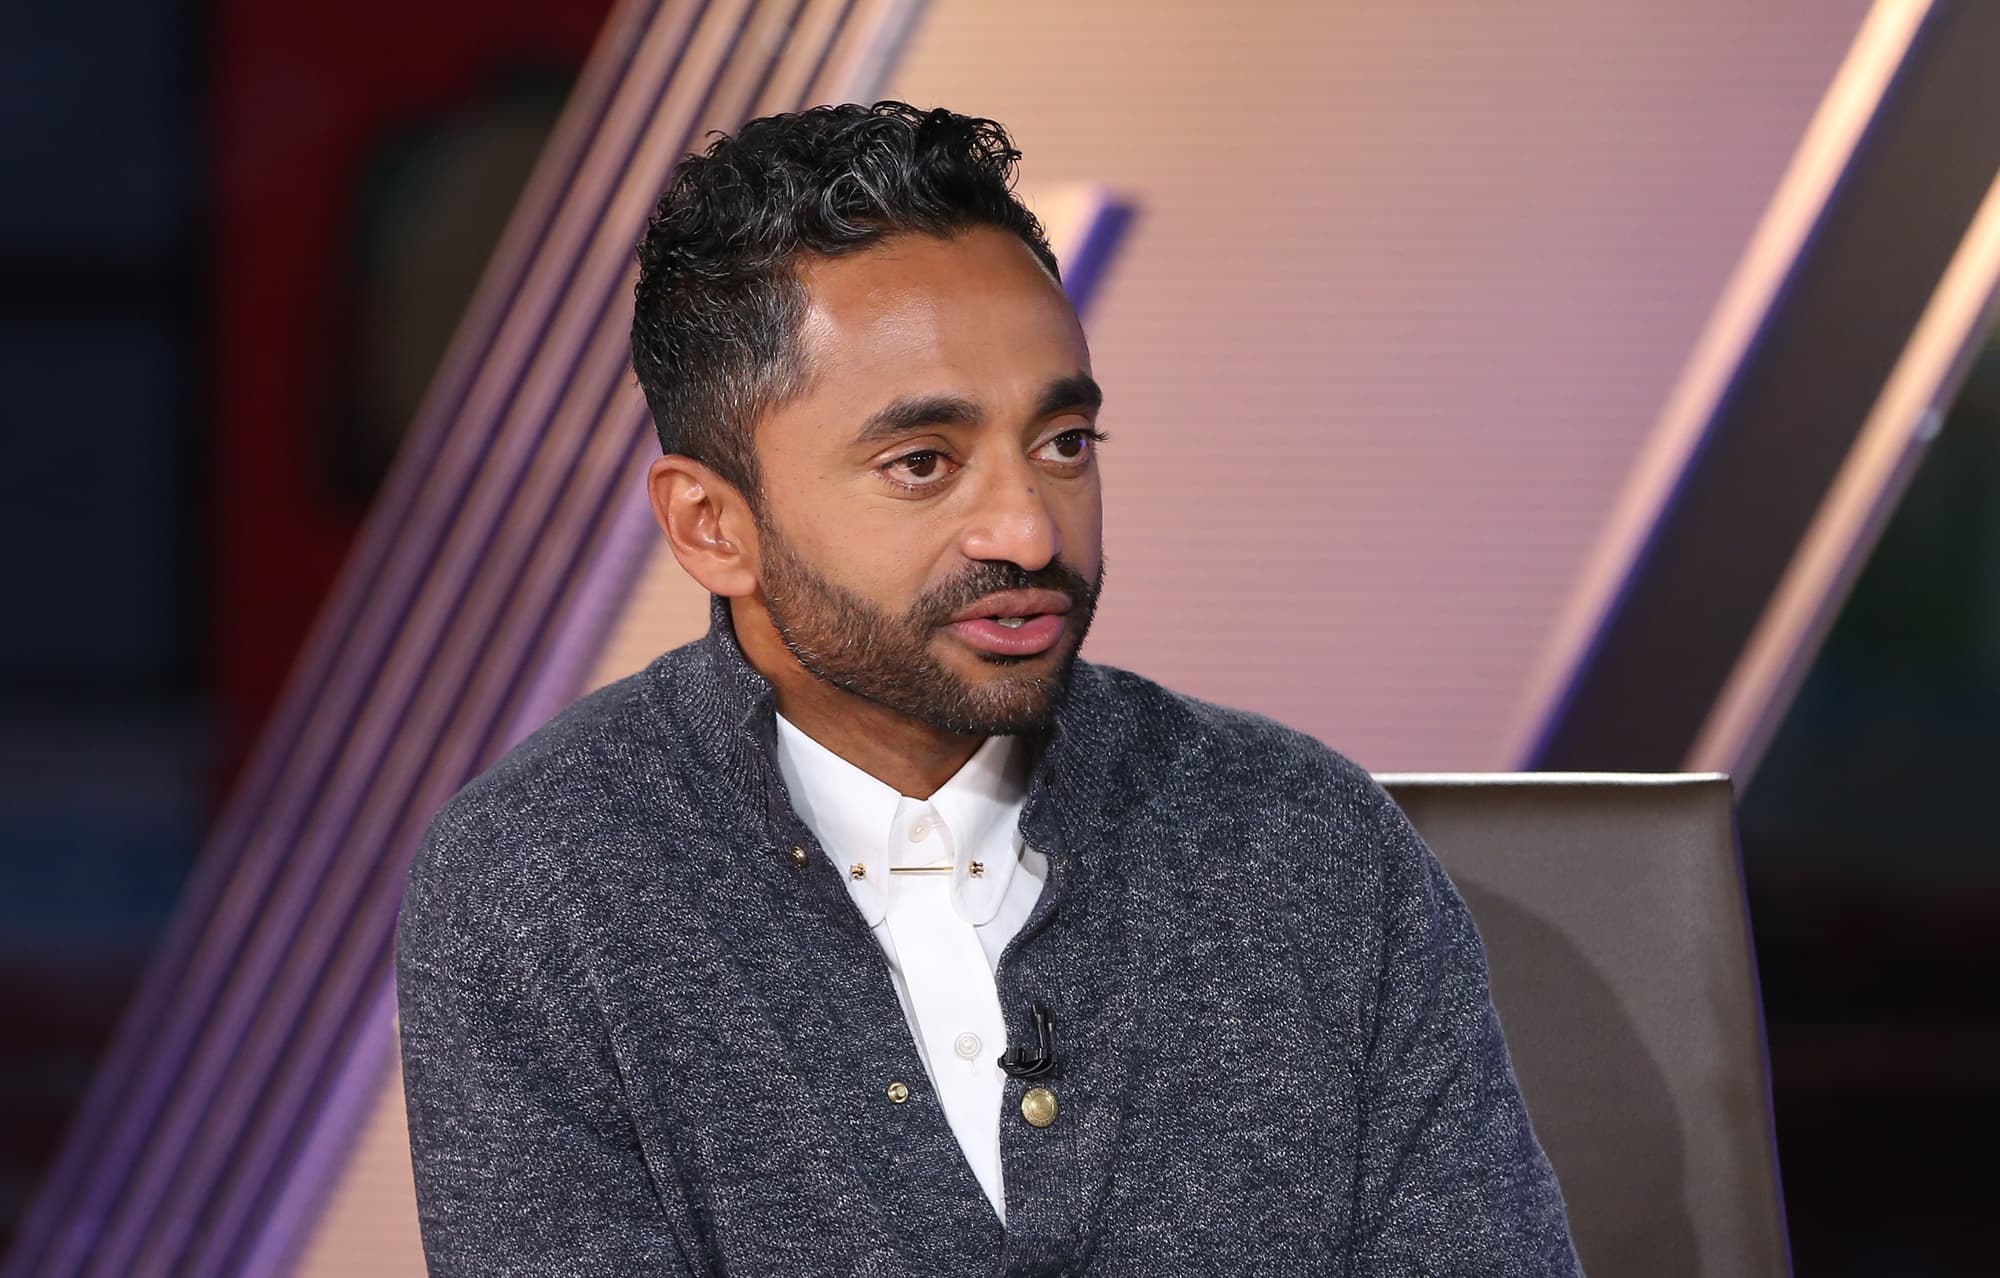 Social Capital's Palihapitiya says bitcoin is going to $1 million in the next 20 years